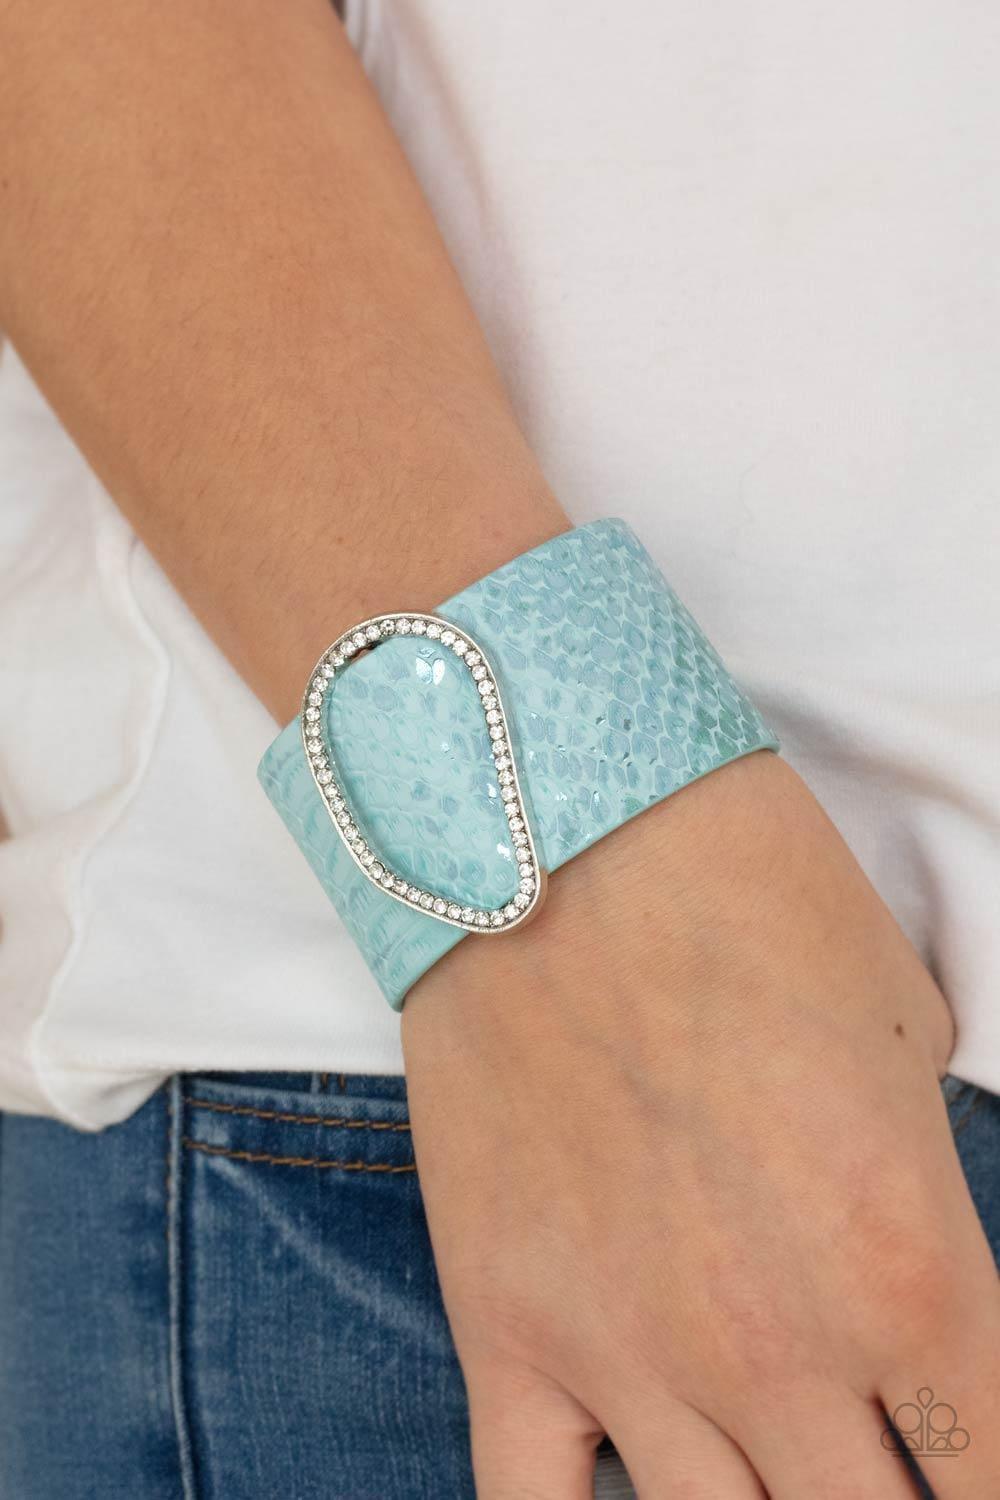 Paparazzi Accessories - Hiss-tory In The Making - Blue Snap Bracelet - Bling by JessieK